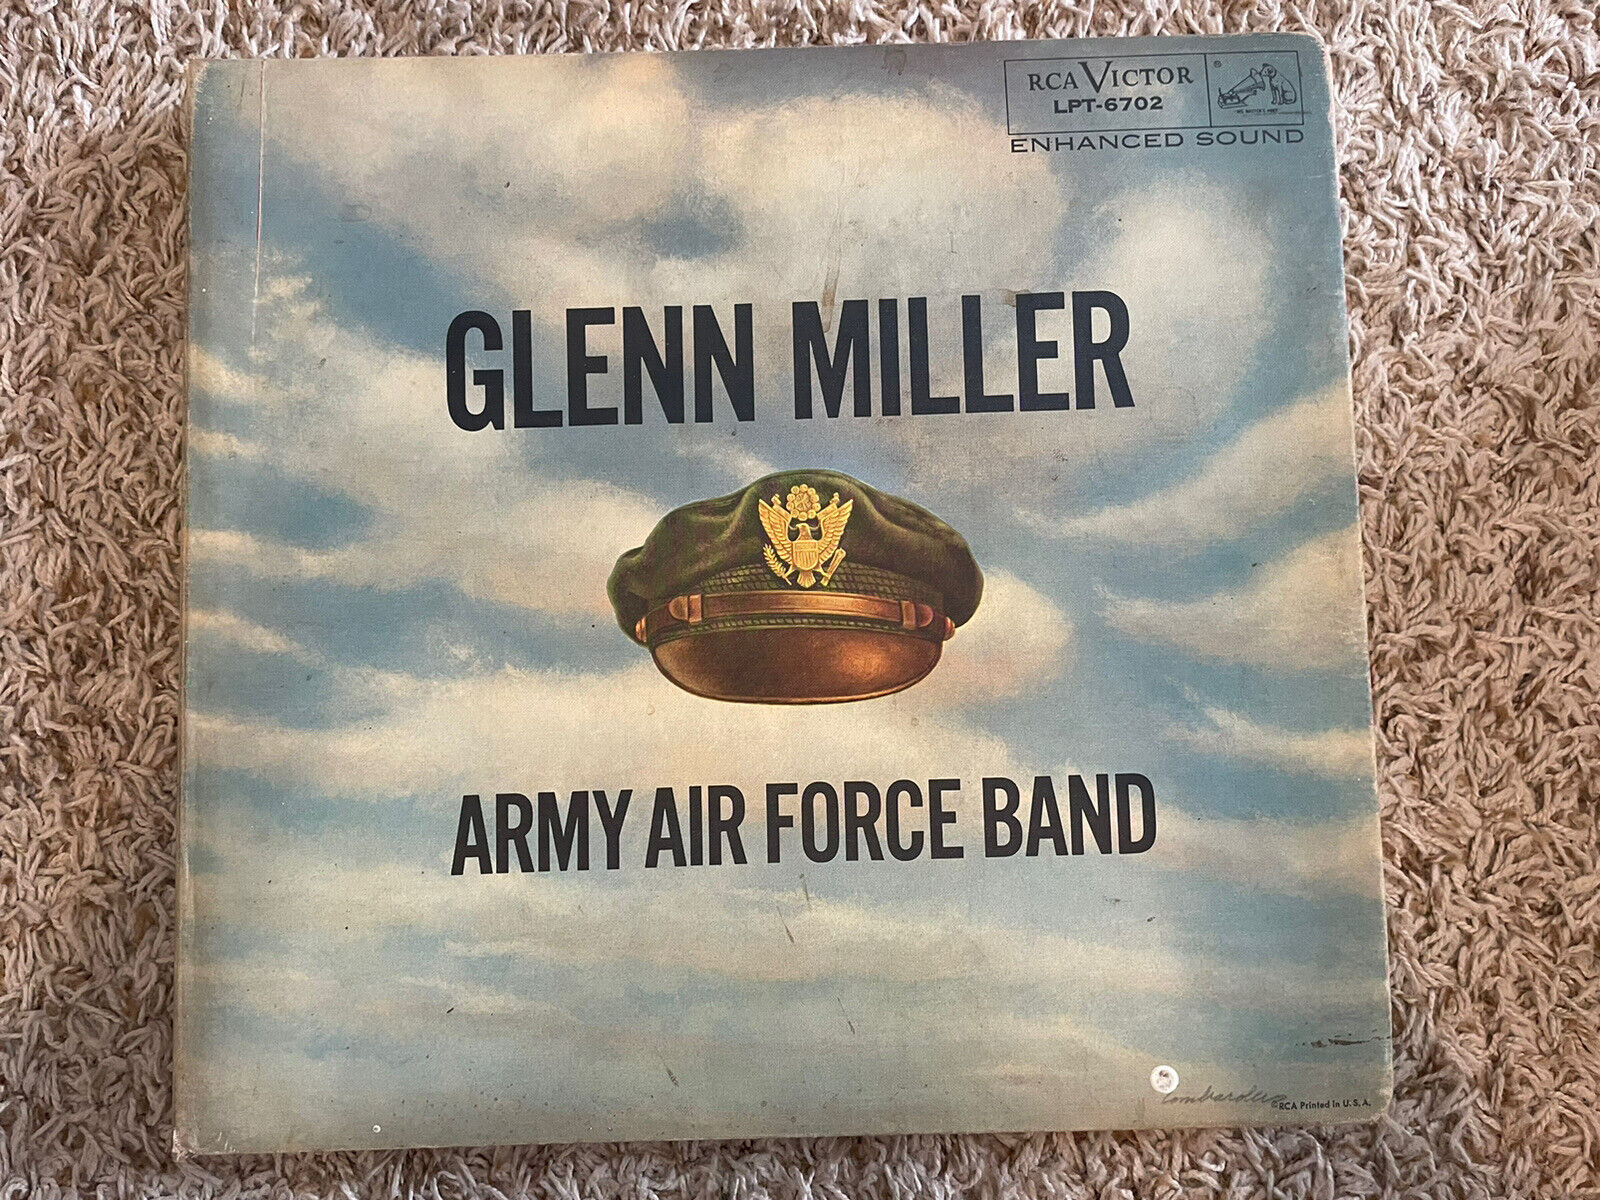 WWII VINTAGE 1955 GLENN MILLER ARMY AIR FORCE BAND 15  45 RPM RECORDS SET 